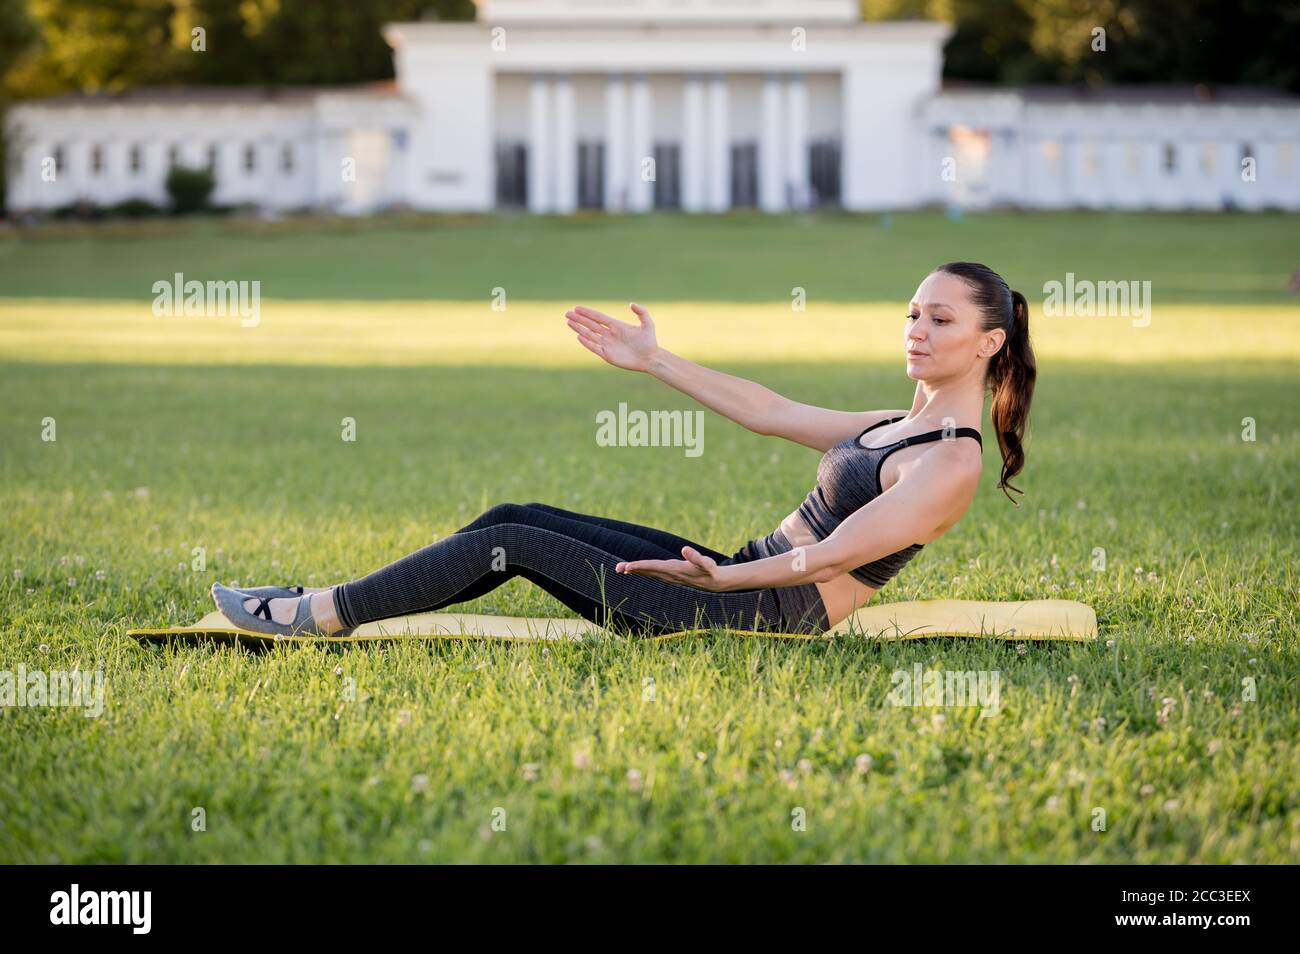 Beautiful young woman lying on a yellow mattress, pose while wearing a tight sports outfit in the park doing pilates or yoga, roll up intermediate exe Stock Photo